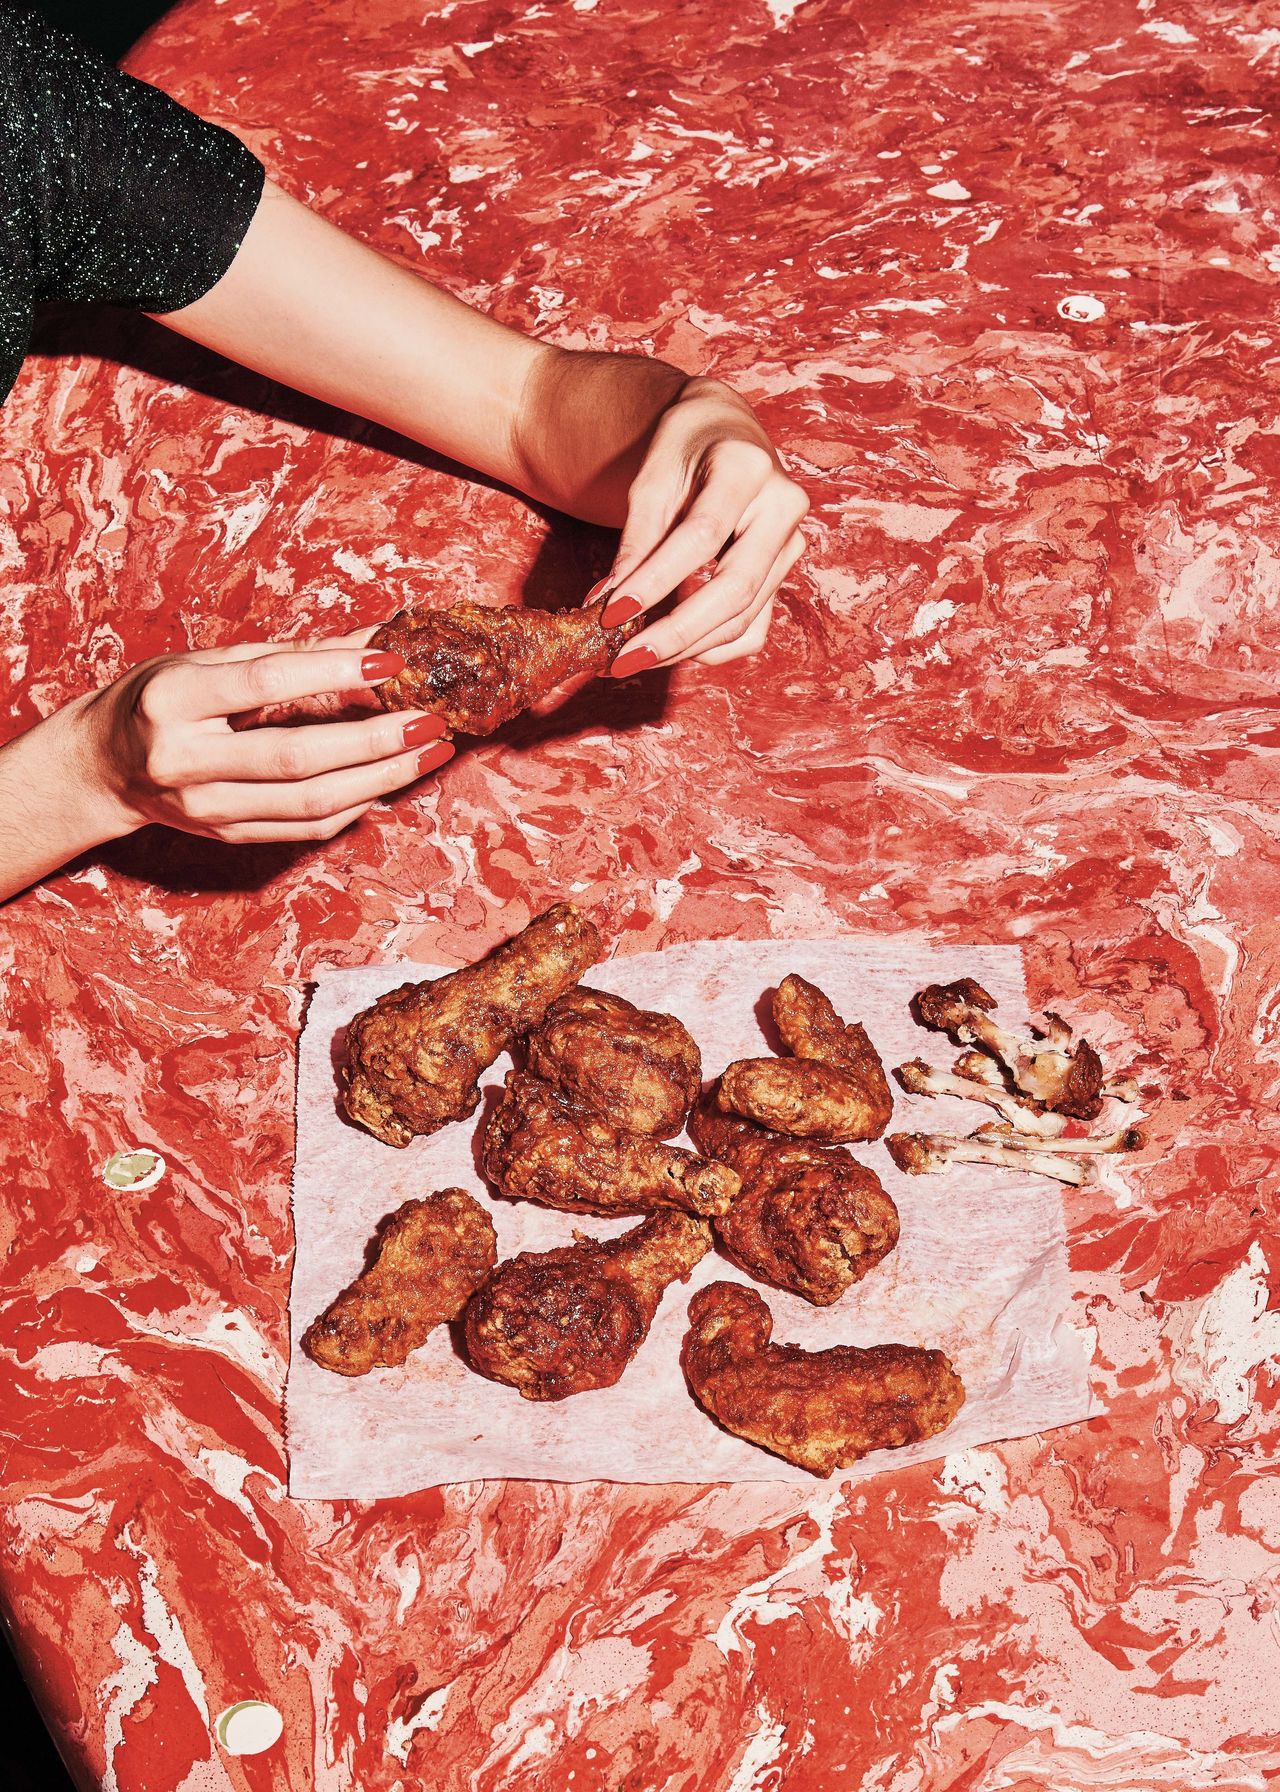 The fourth issue includes a series of images of fried chicken. 